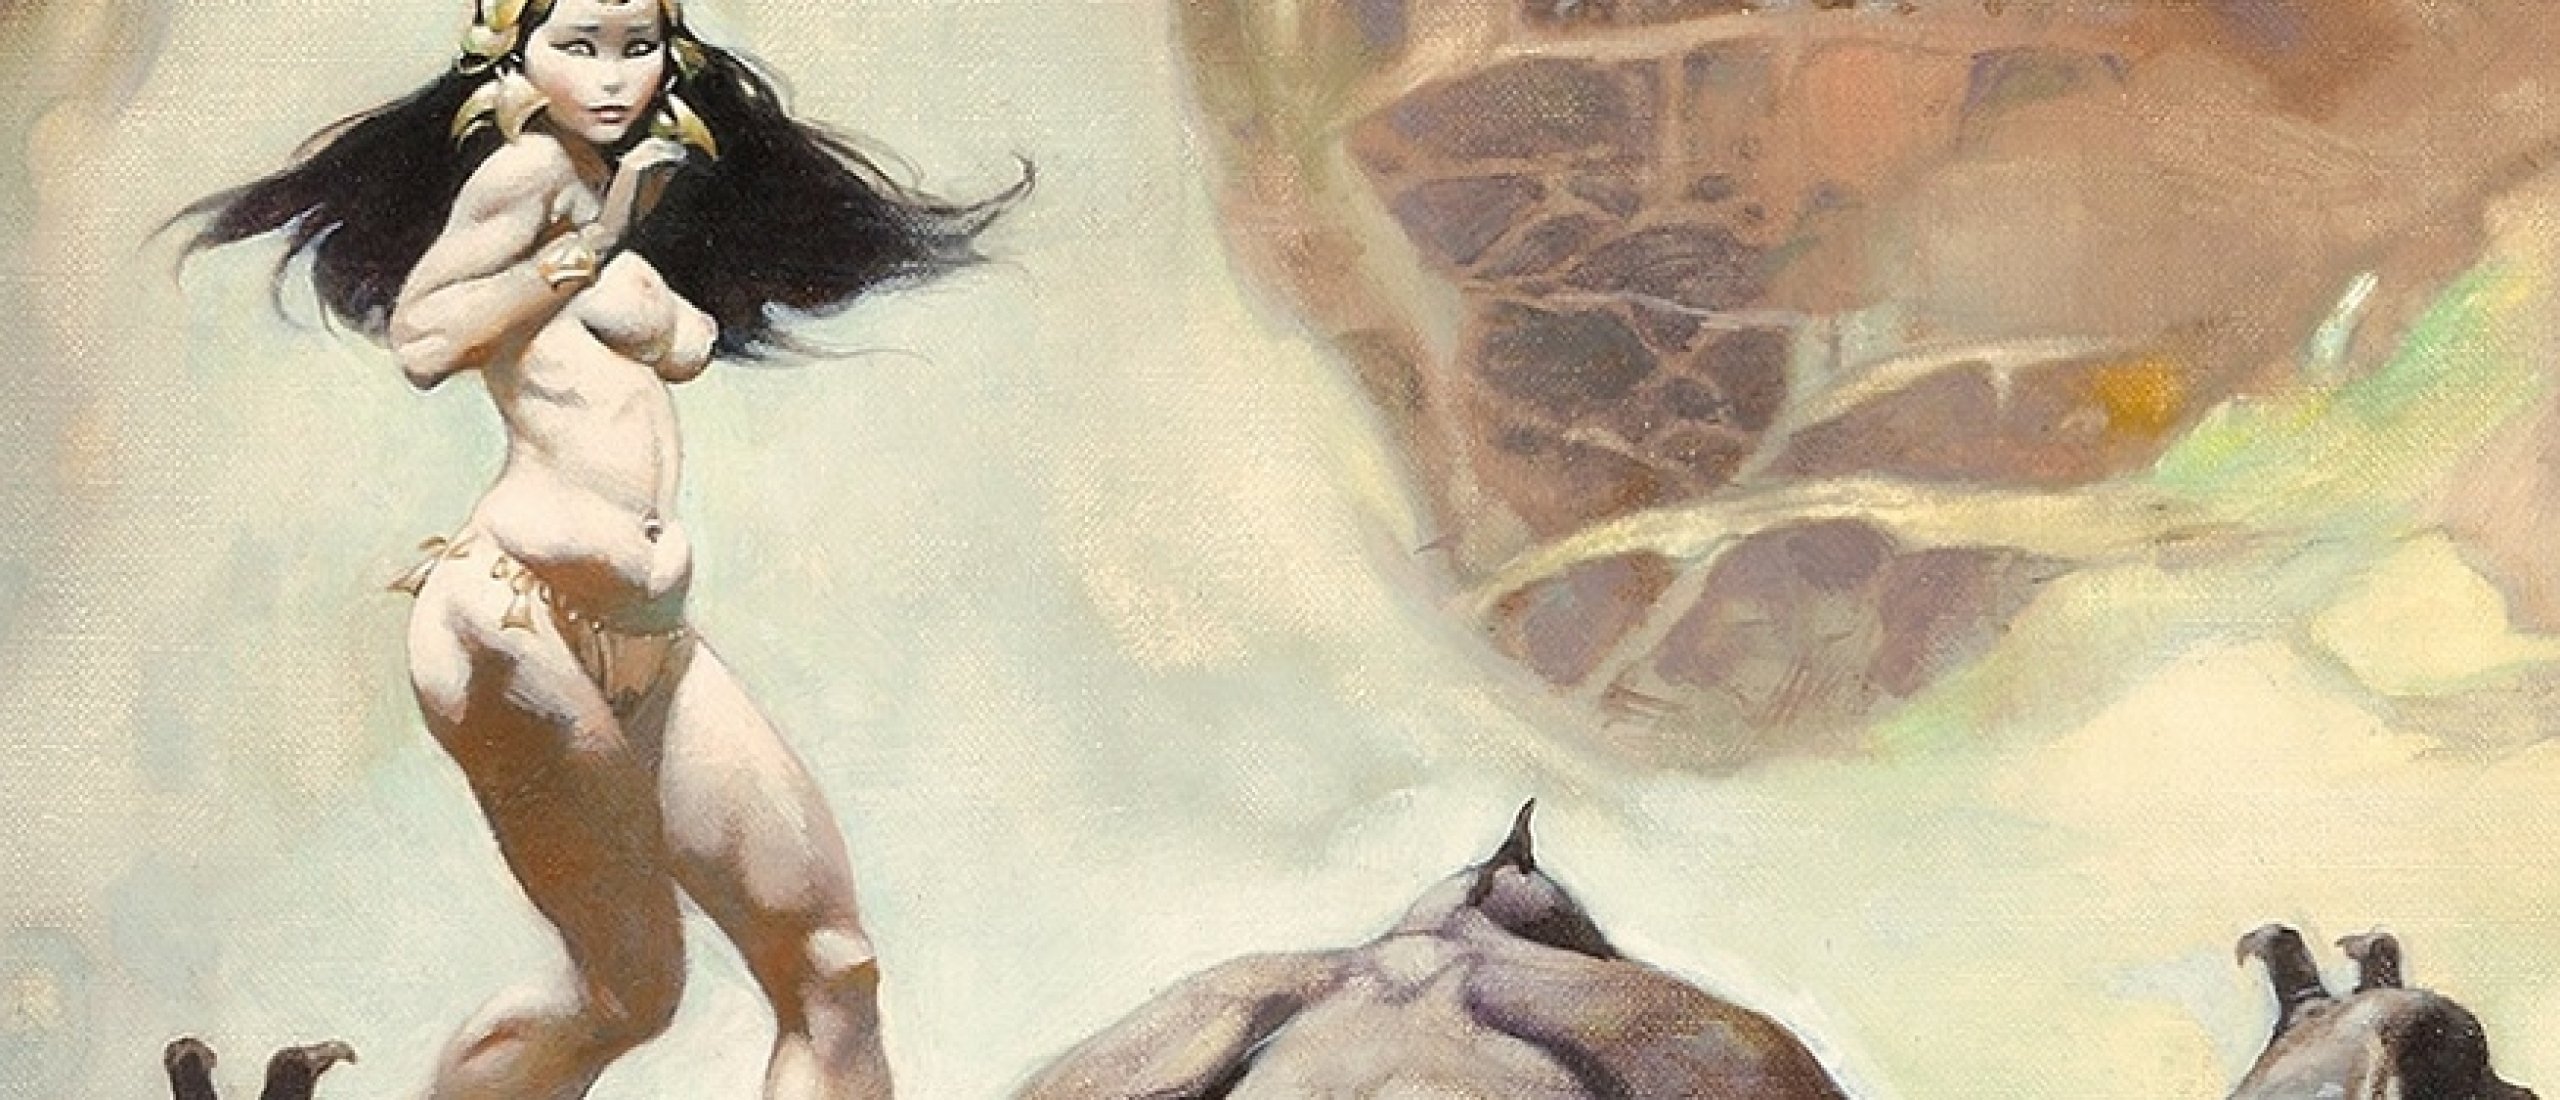 The Strong Sensuality in Frank Frazetta's Paintings (28 Examples)